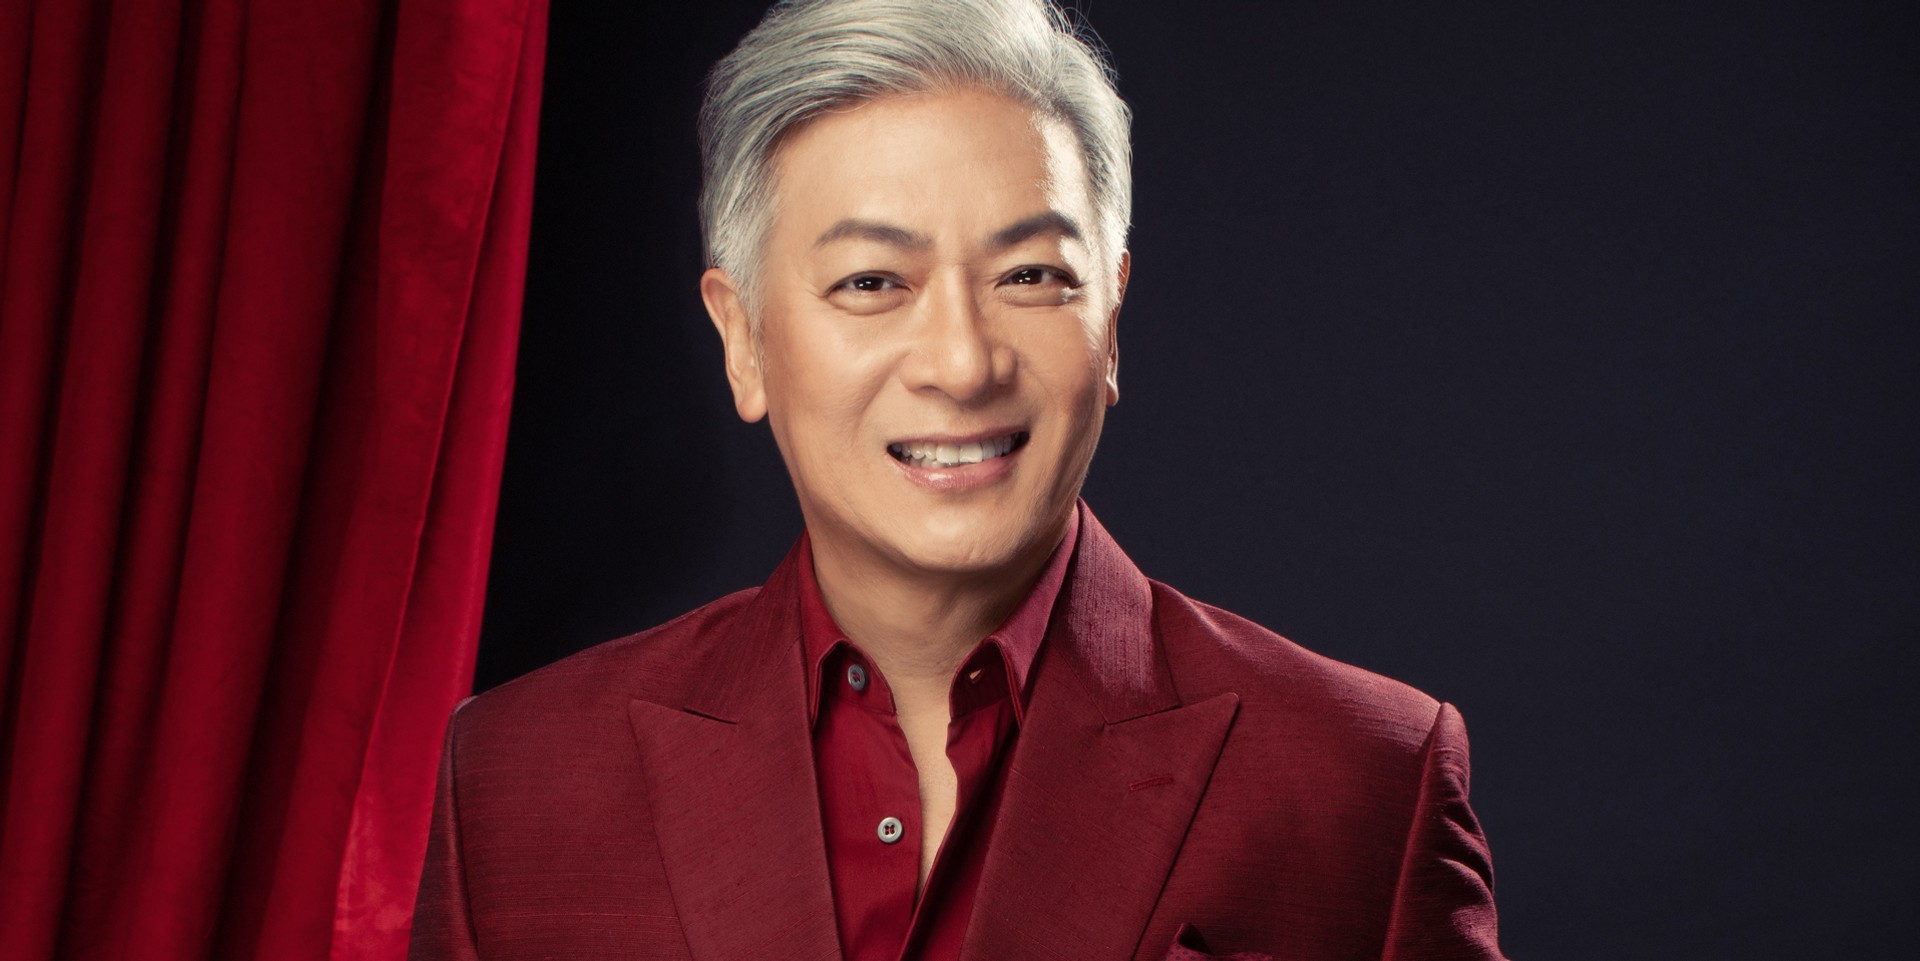 Catch the best of Dick Lee’s musical works at SINGAPOPERA